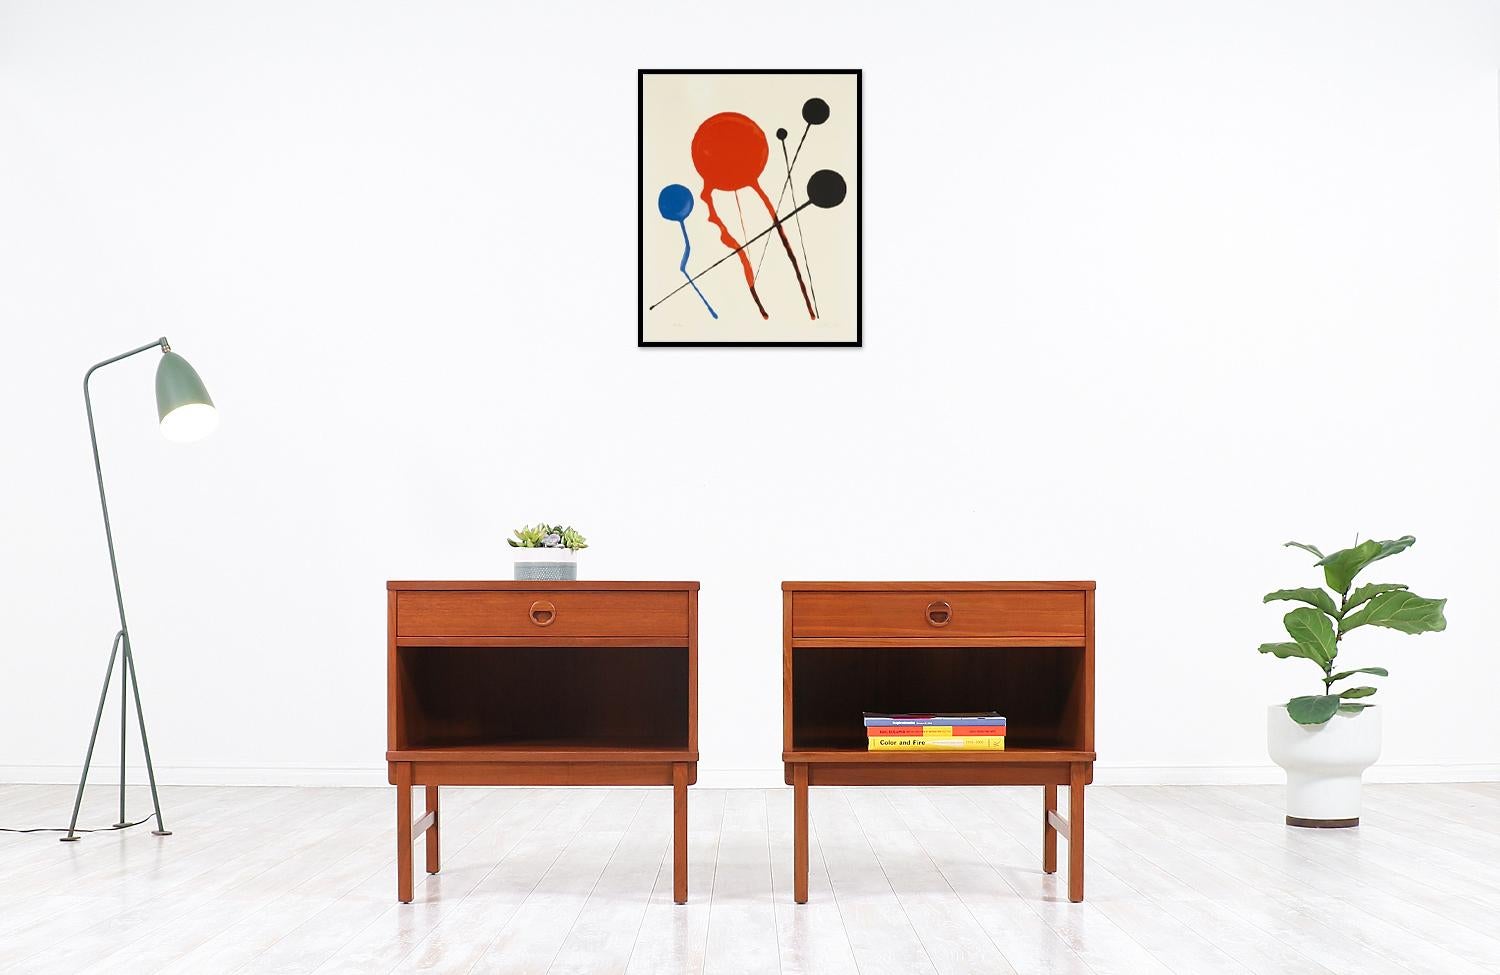 Scandinavian Modern nightstands designed by Swedish architect Yngve Ekström in collaboration with DUX of Sweden in 1960s. These alluring Model 518 nightstands are crafted in warm teak wood that feature a single dovetailed drawer and a lower open